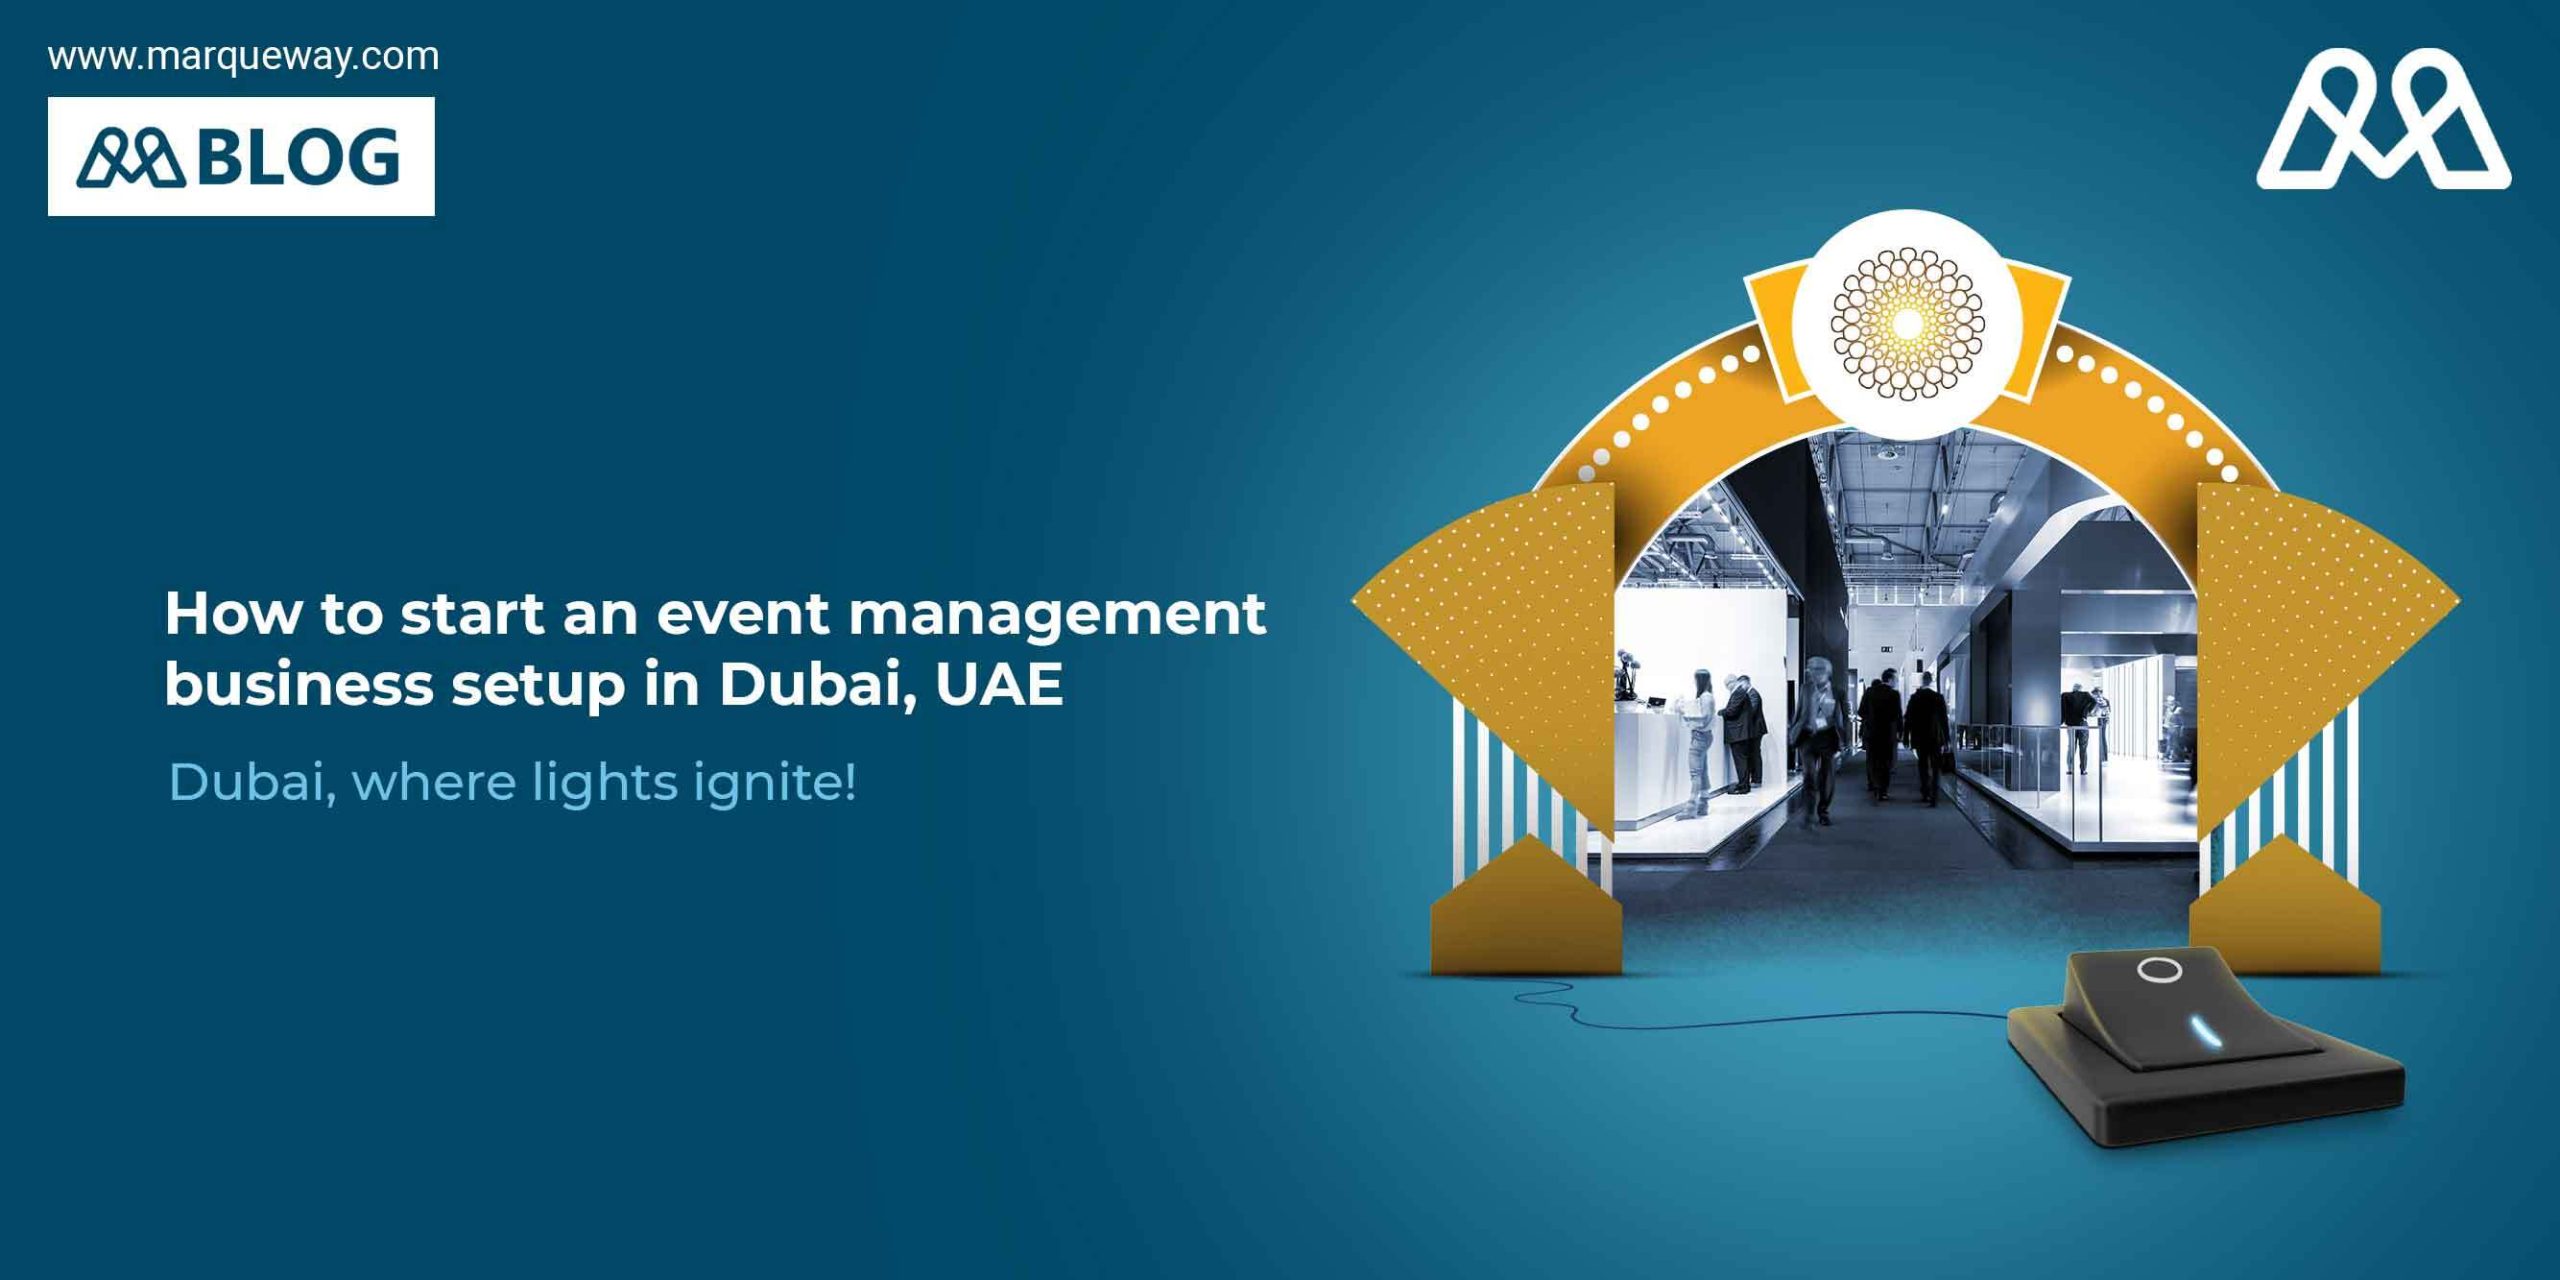 How to start an event management business setup in Dubai, UAE